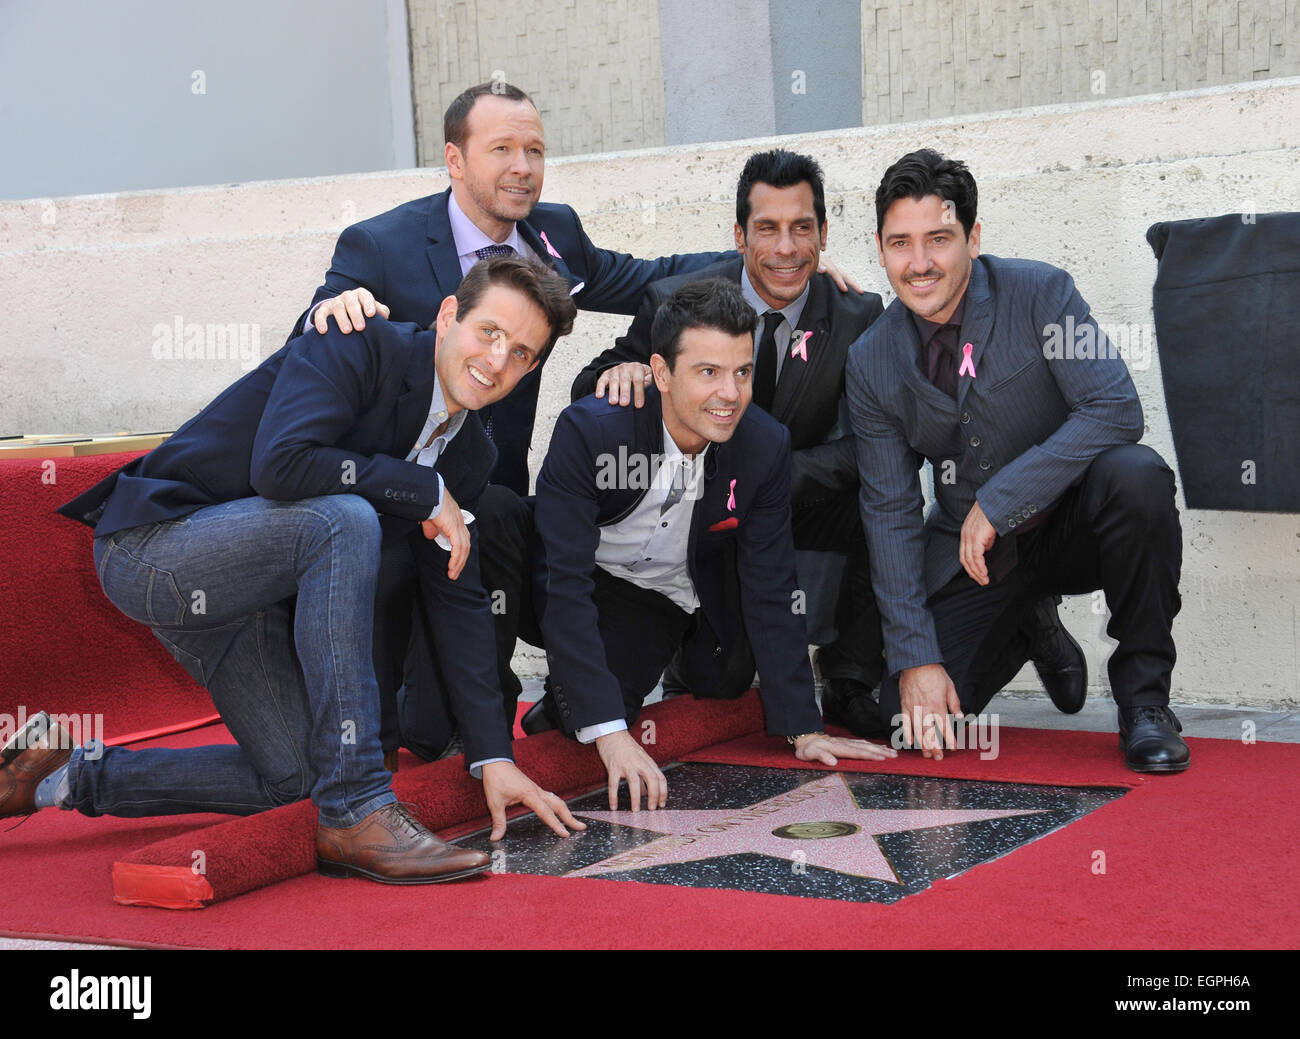 LOS ANGELES, CA - OCTOBER 9, 2014: Pop group New Kids On The Block - Jordan Knight, Jonathan Knight, Donnie Wahlberg, Joey McIntyre & Danny Wood - on Hollywood Boulevard where they were honored with the 2,530th star on the Hollywood Walk of Fame. Stock Photo